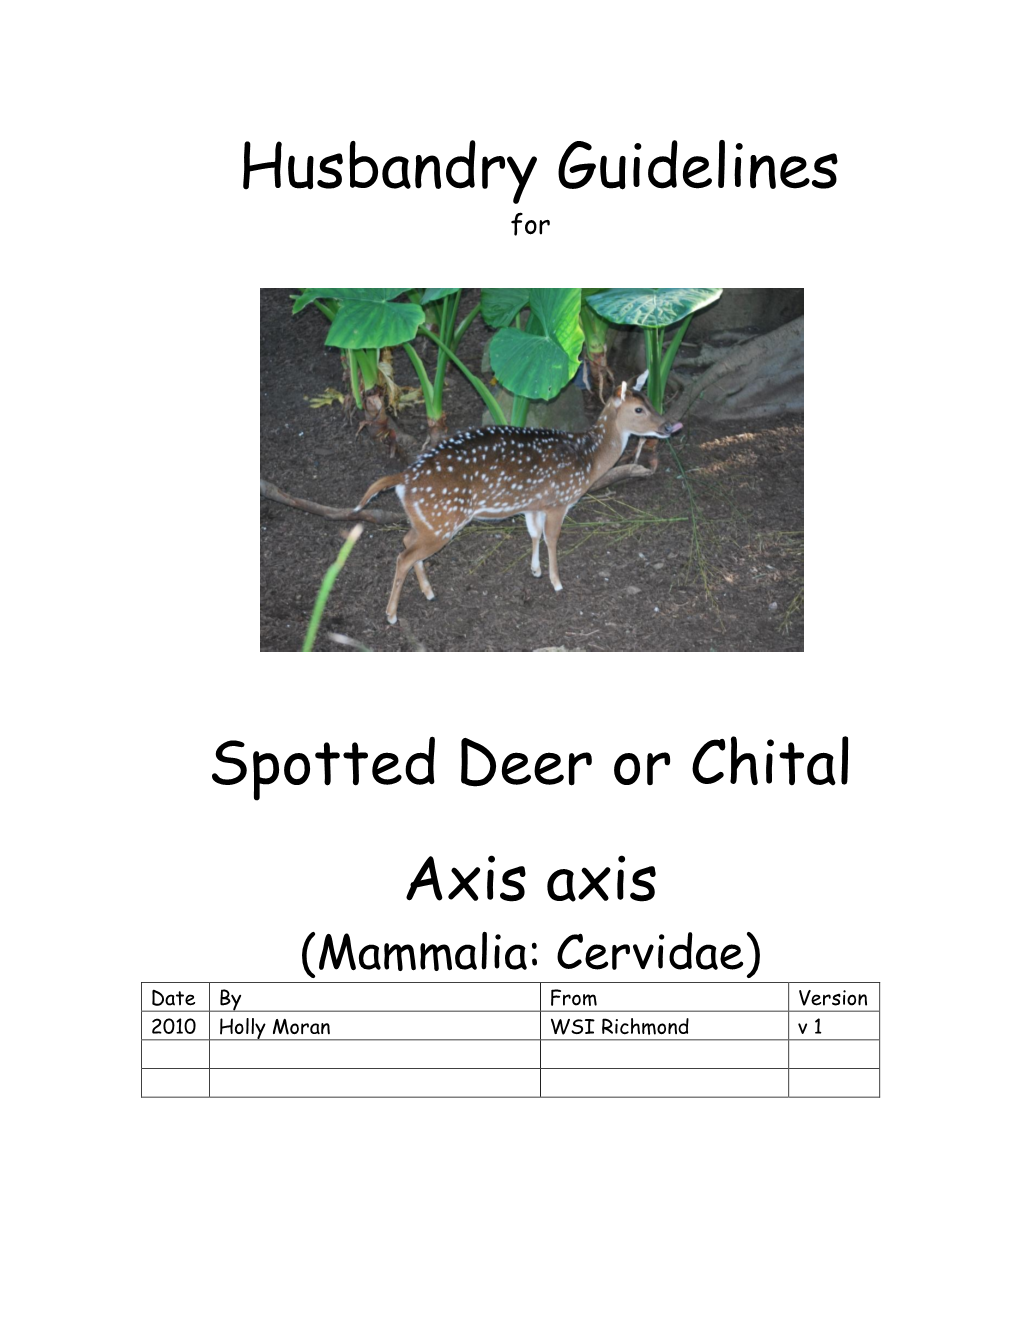 Spotted Deer Axis Axis